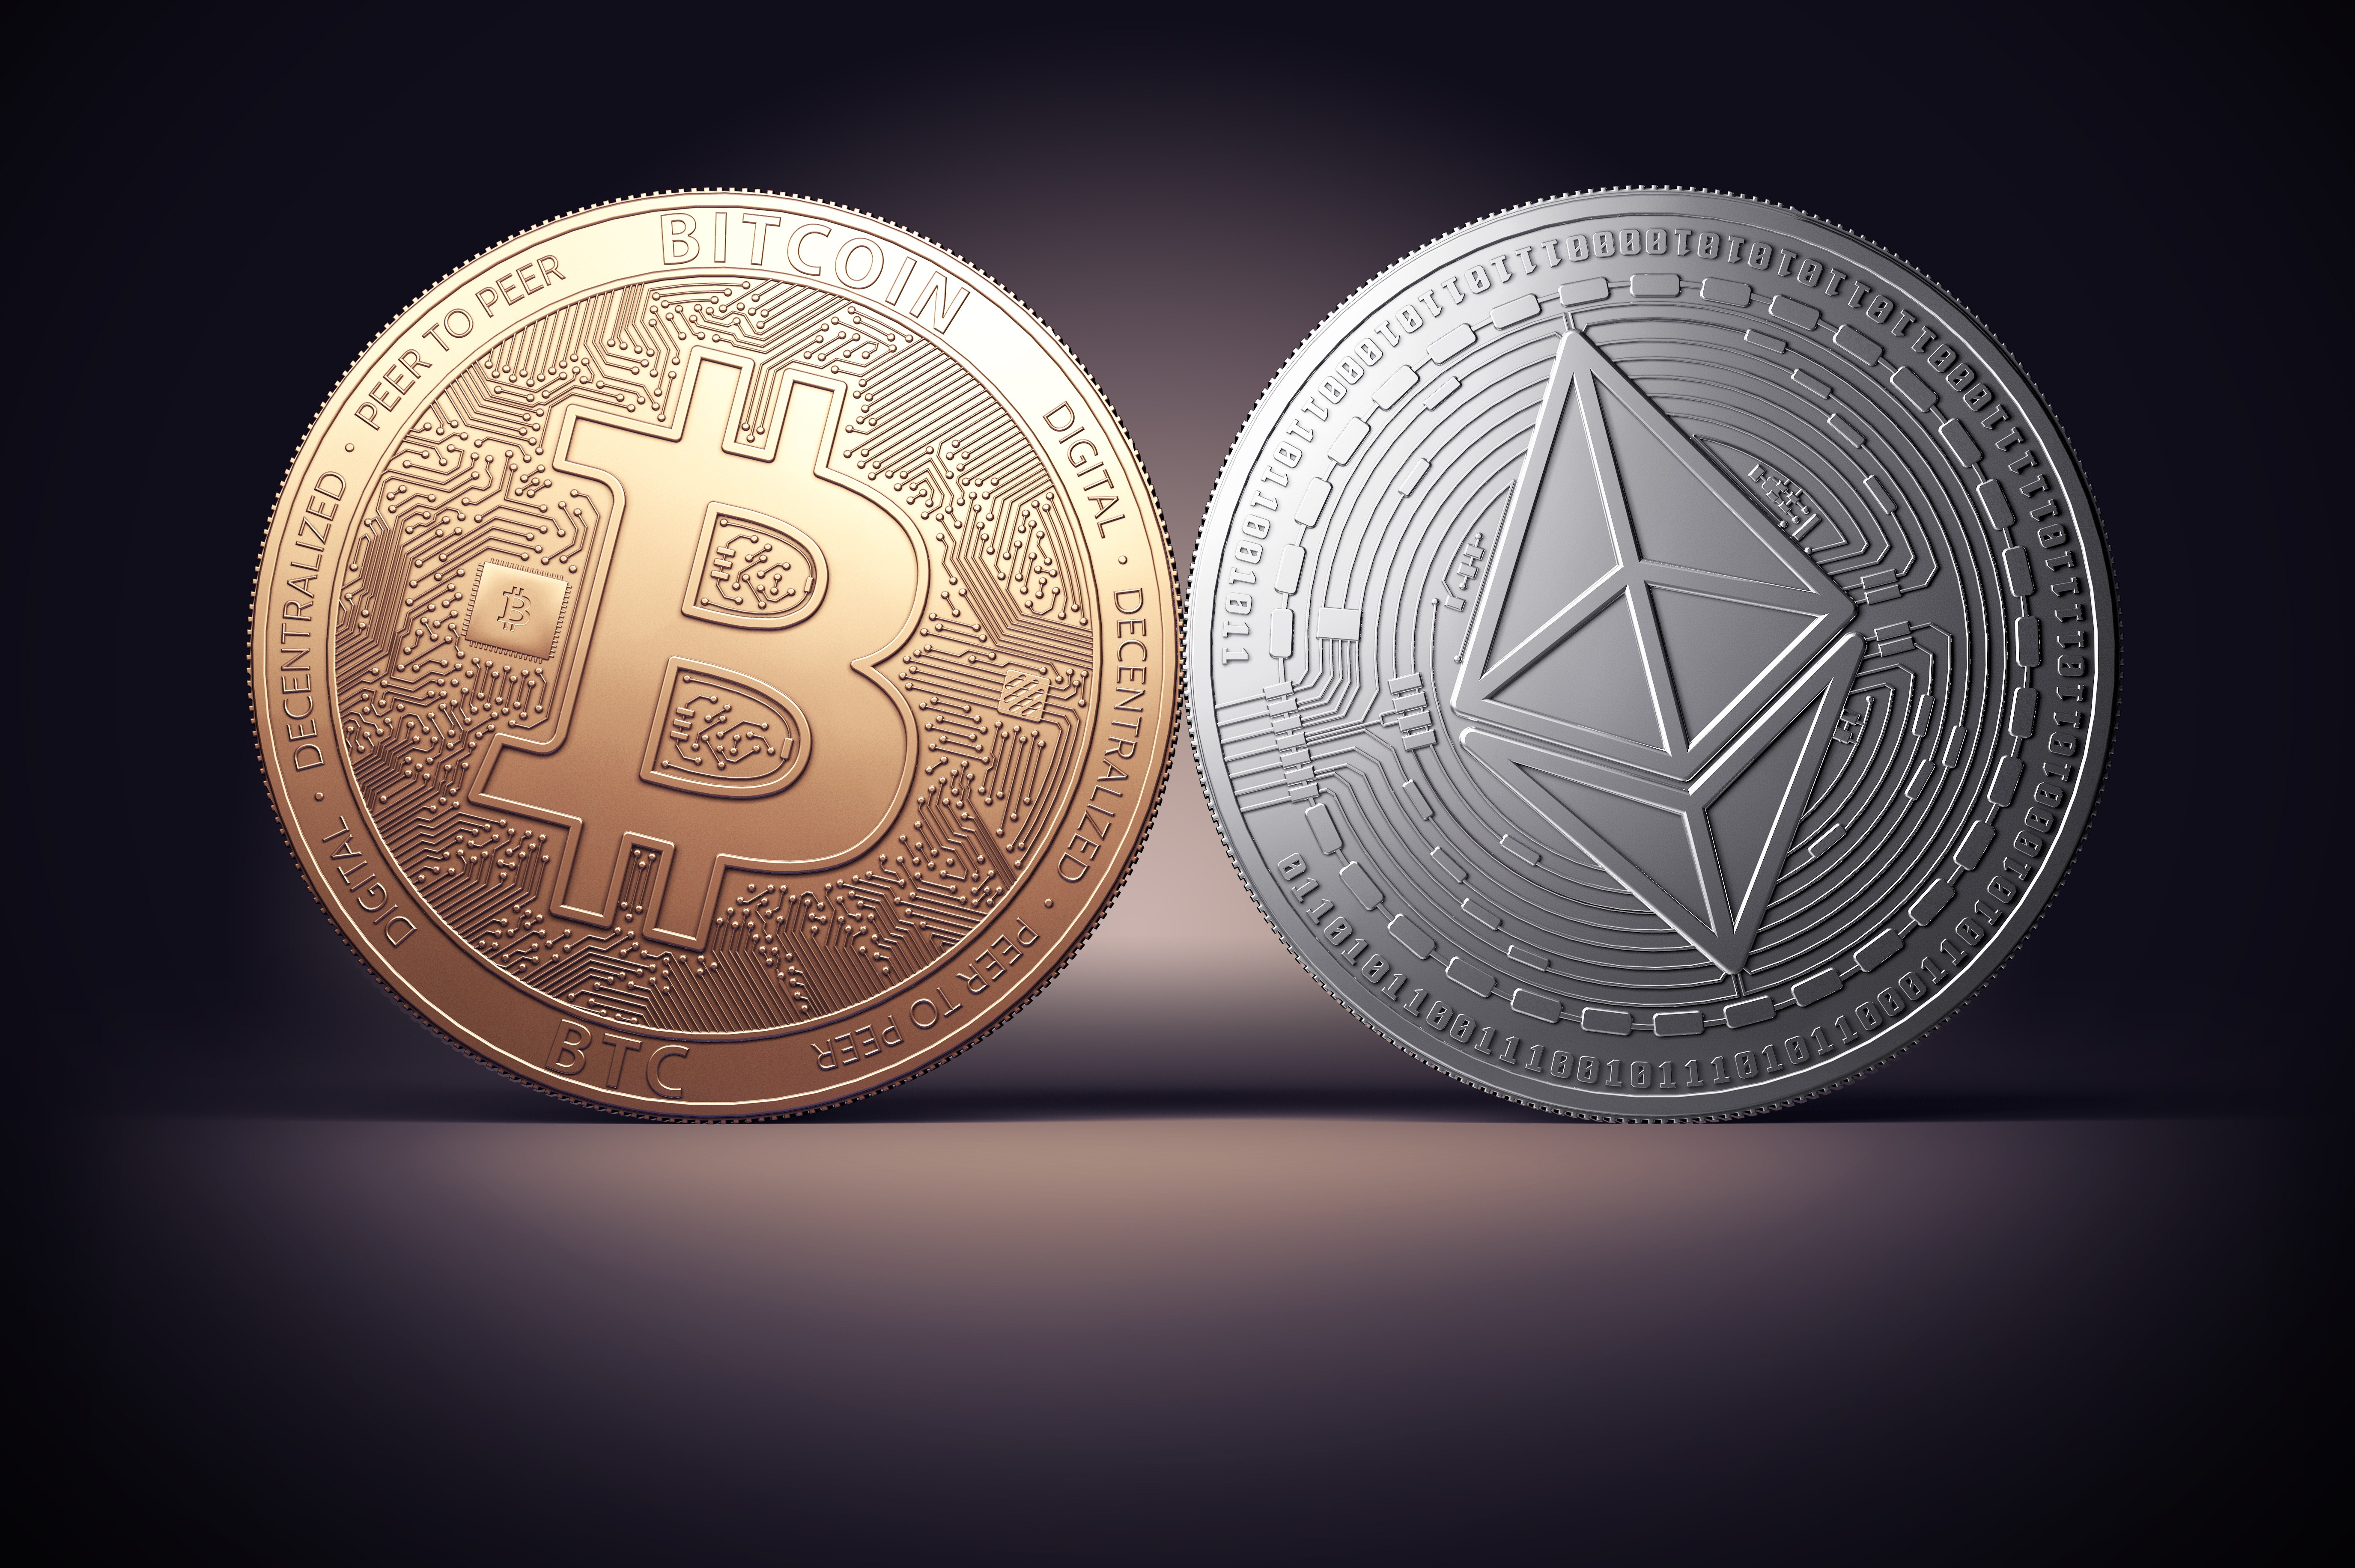 Bitcoin, Ethereum Flat, Dogecoin Among Top Gainers: Why This Analyst Says Tesla's Apex Coin Sale Implies Crypto Bottom Is Close